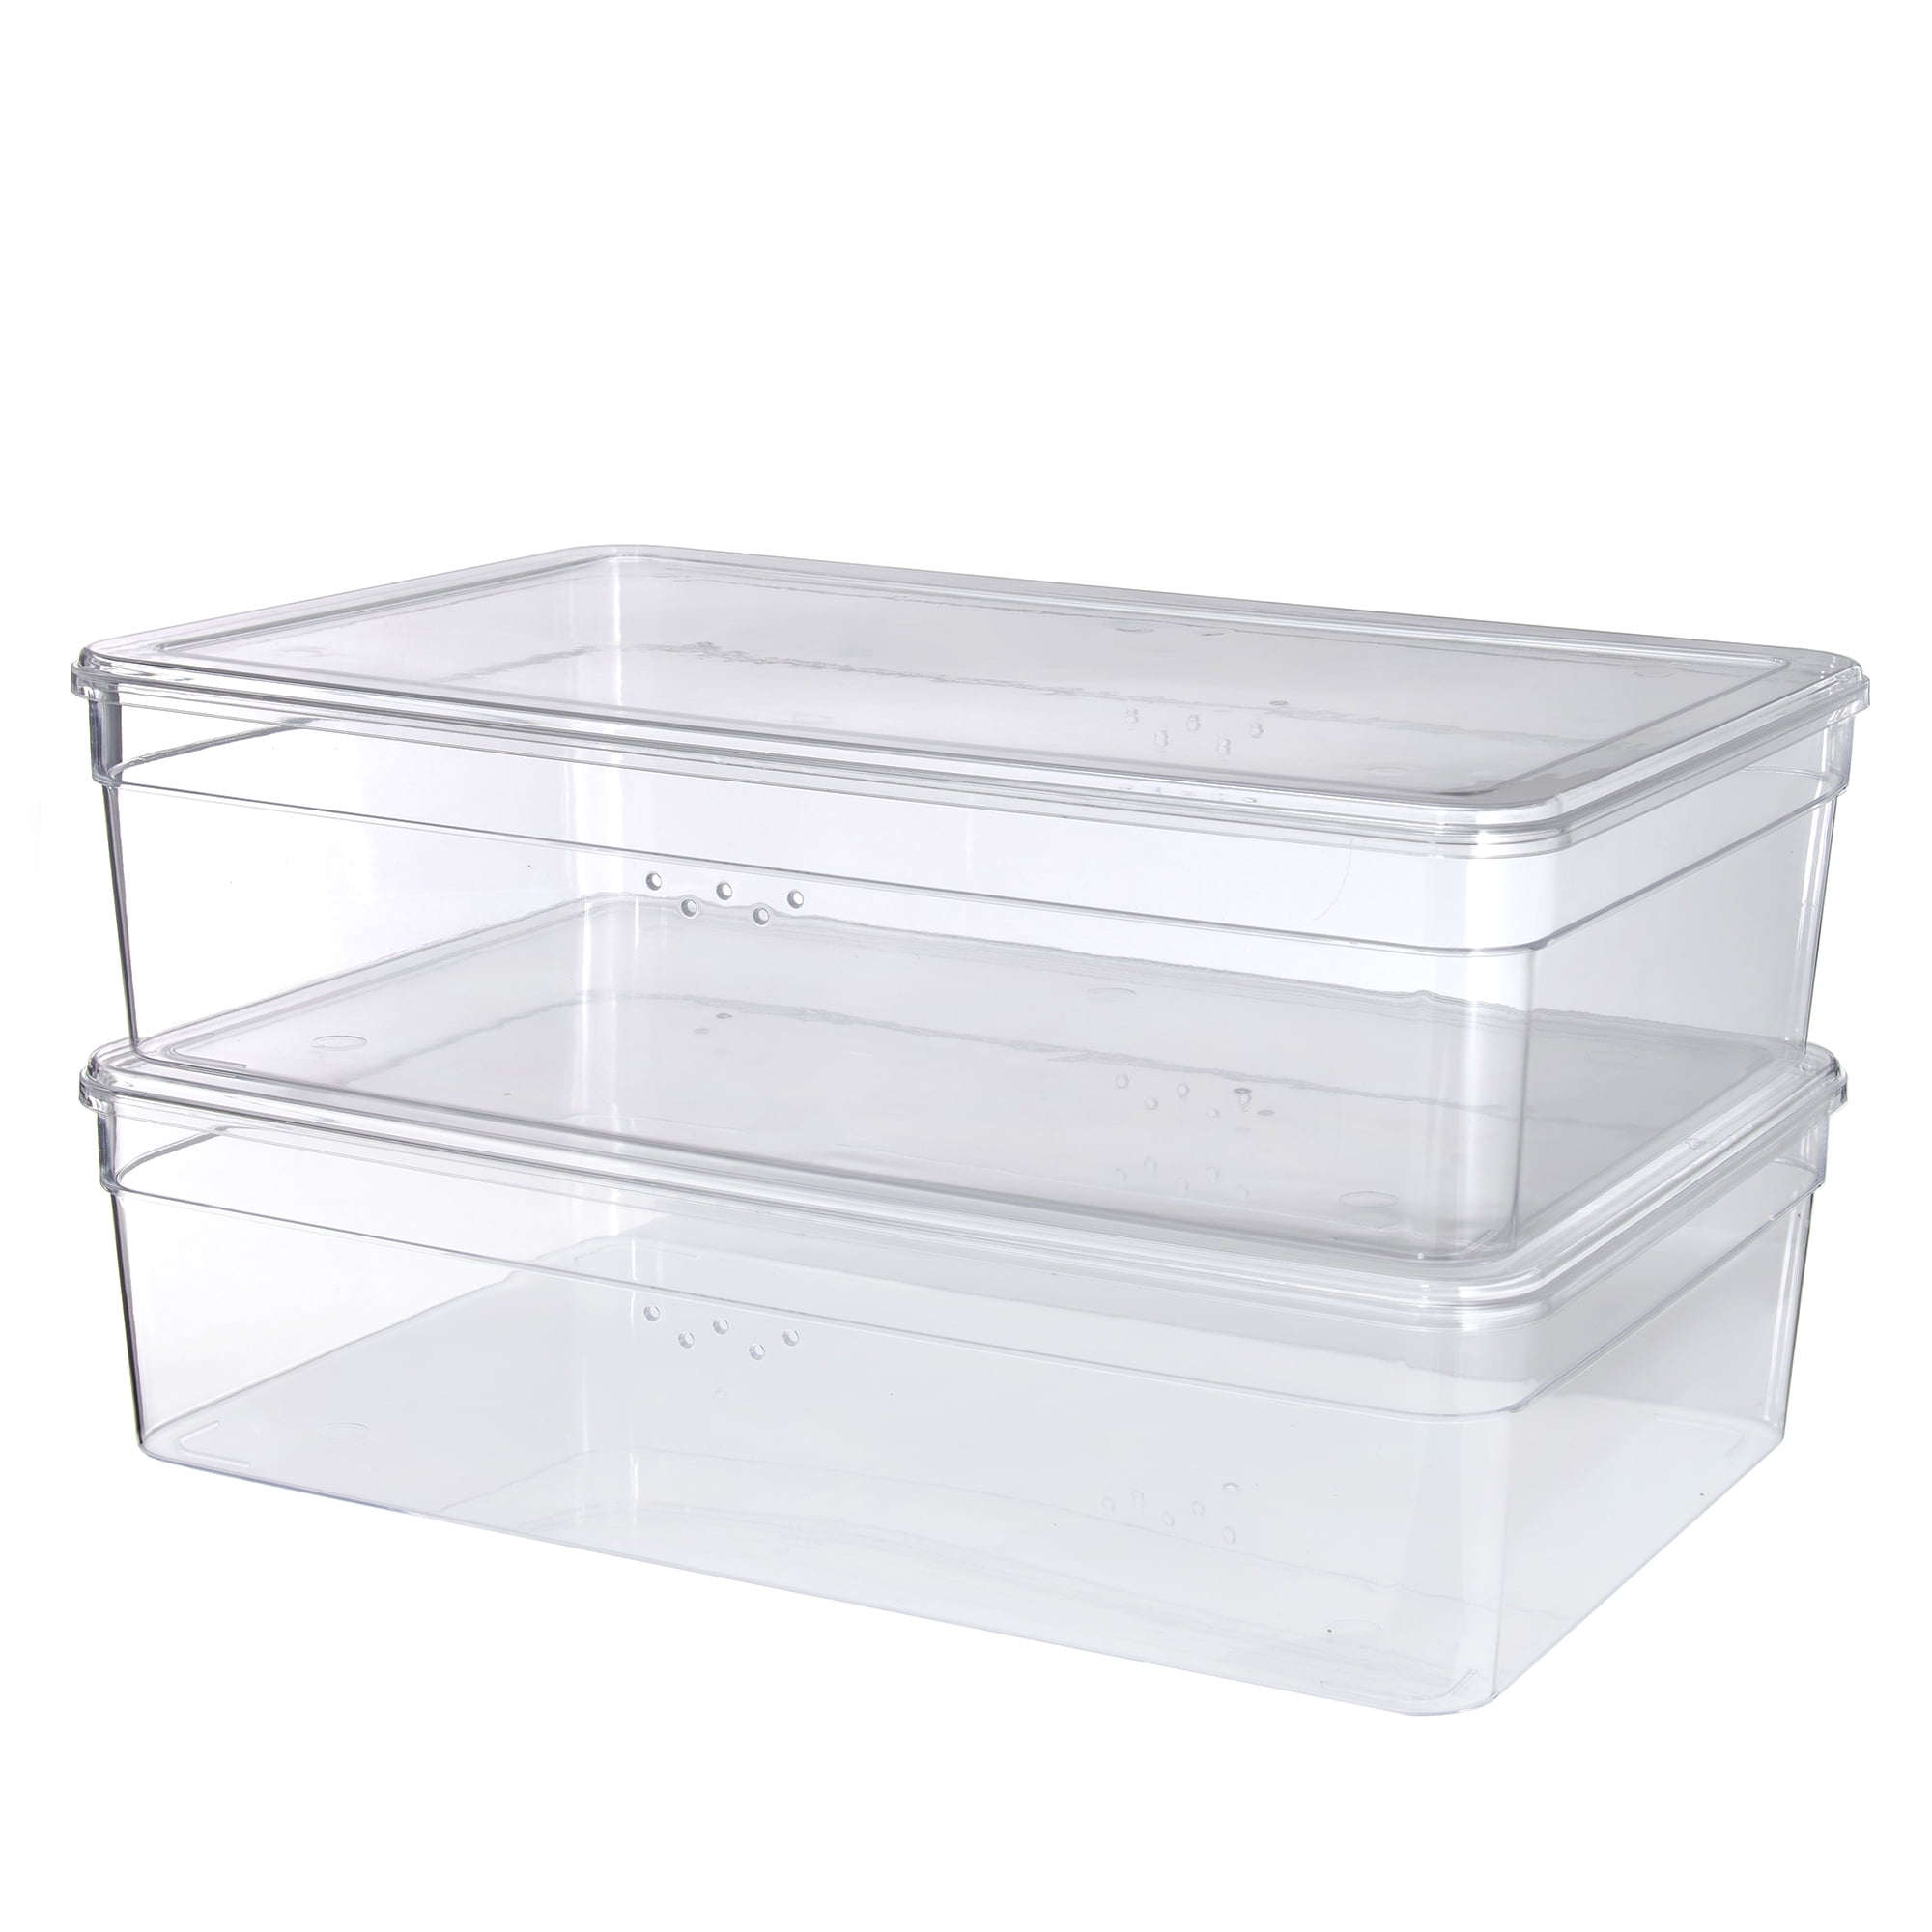 Mainstays Clear Plastic Glossy Finish Boot Shoe Box with Lid, Adult Size 